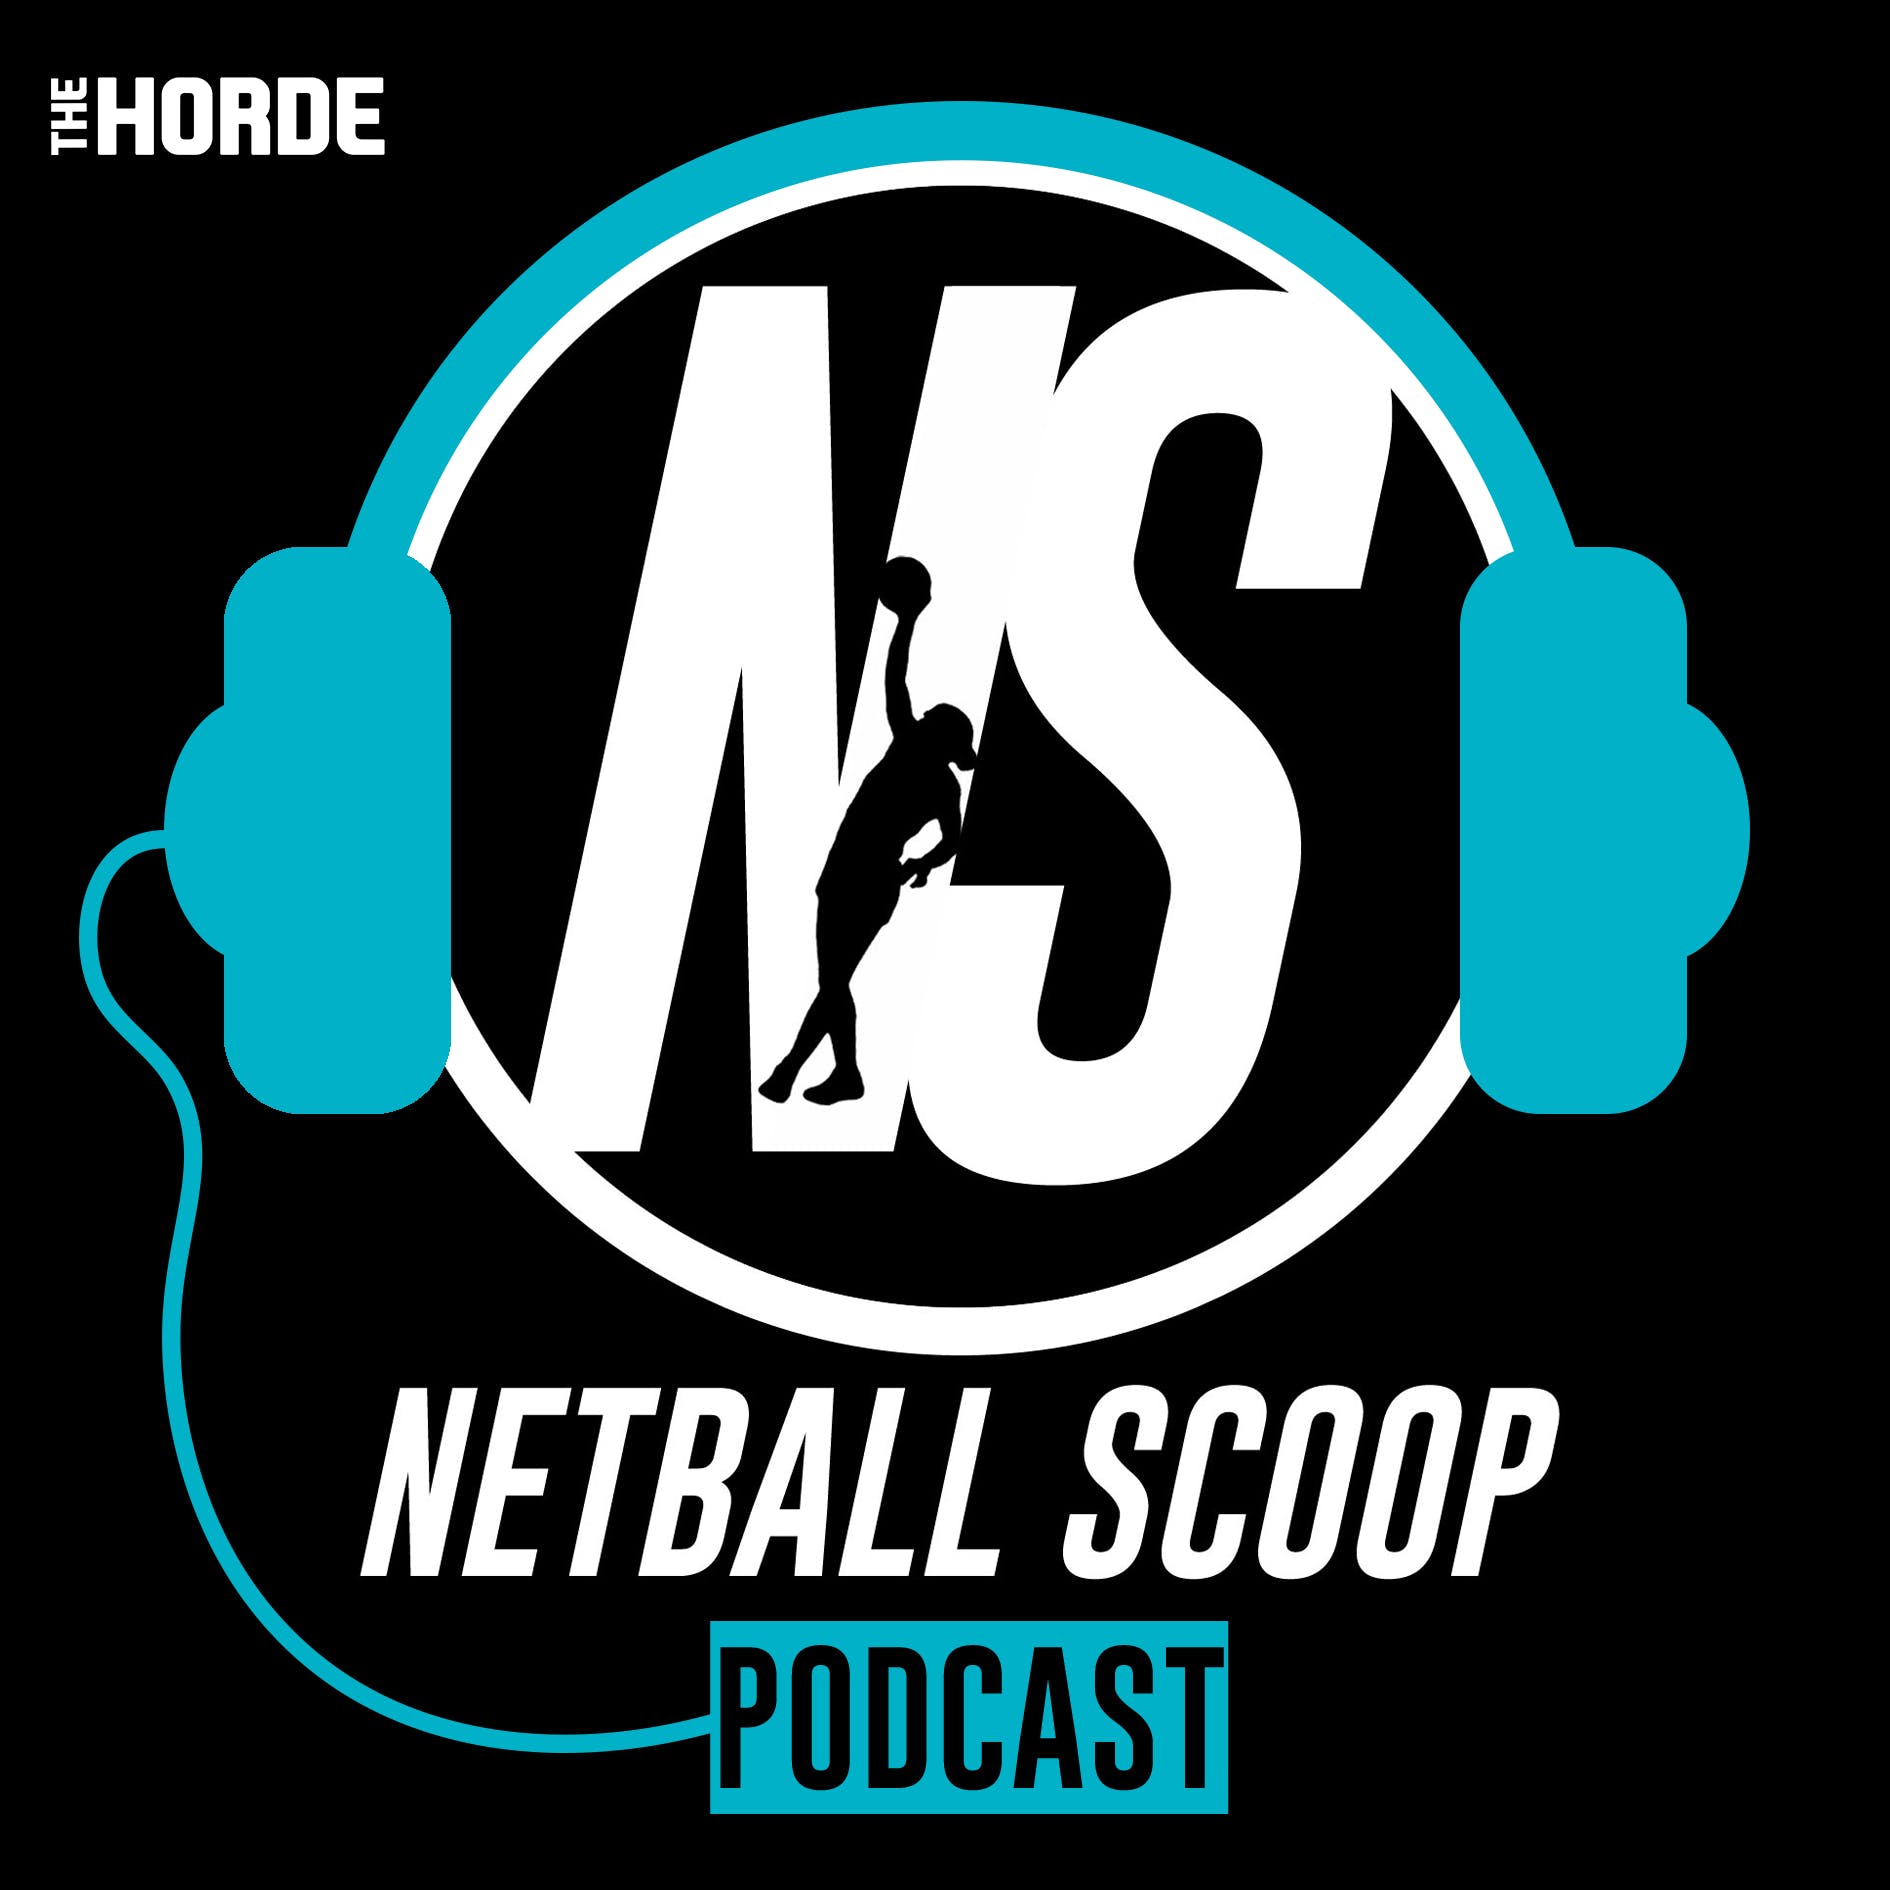 The Netball Scoop Podcast